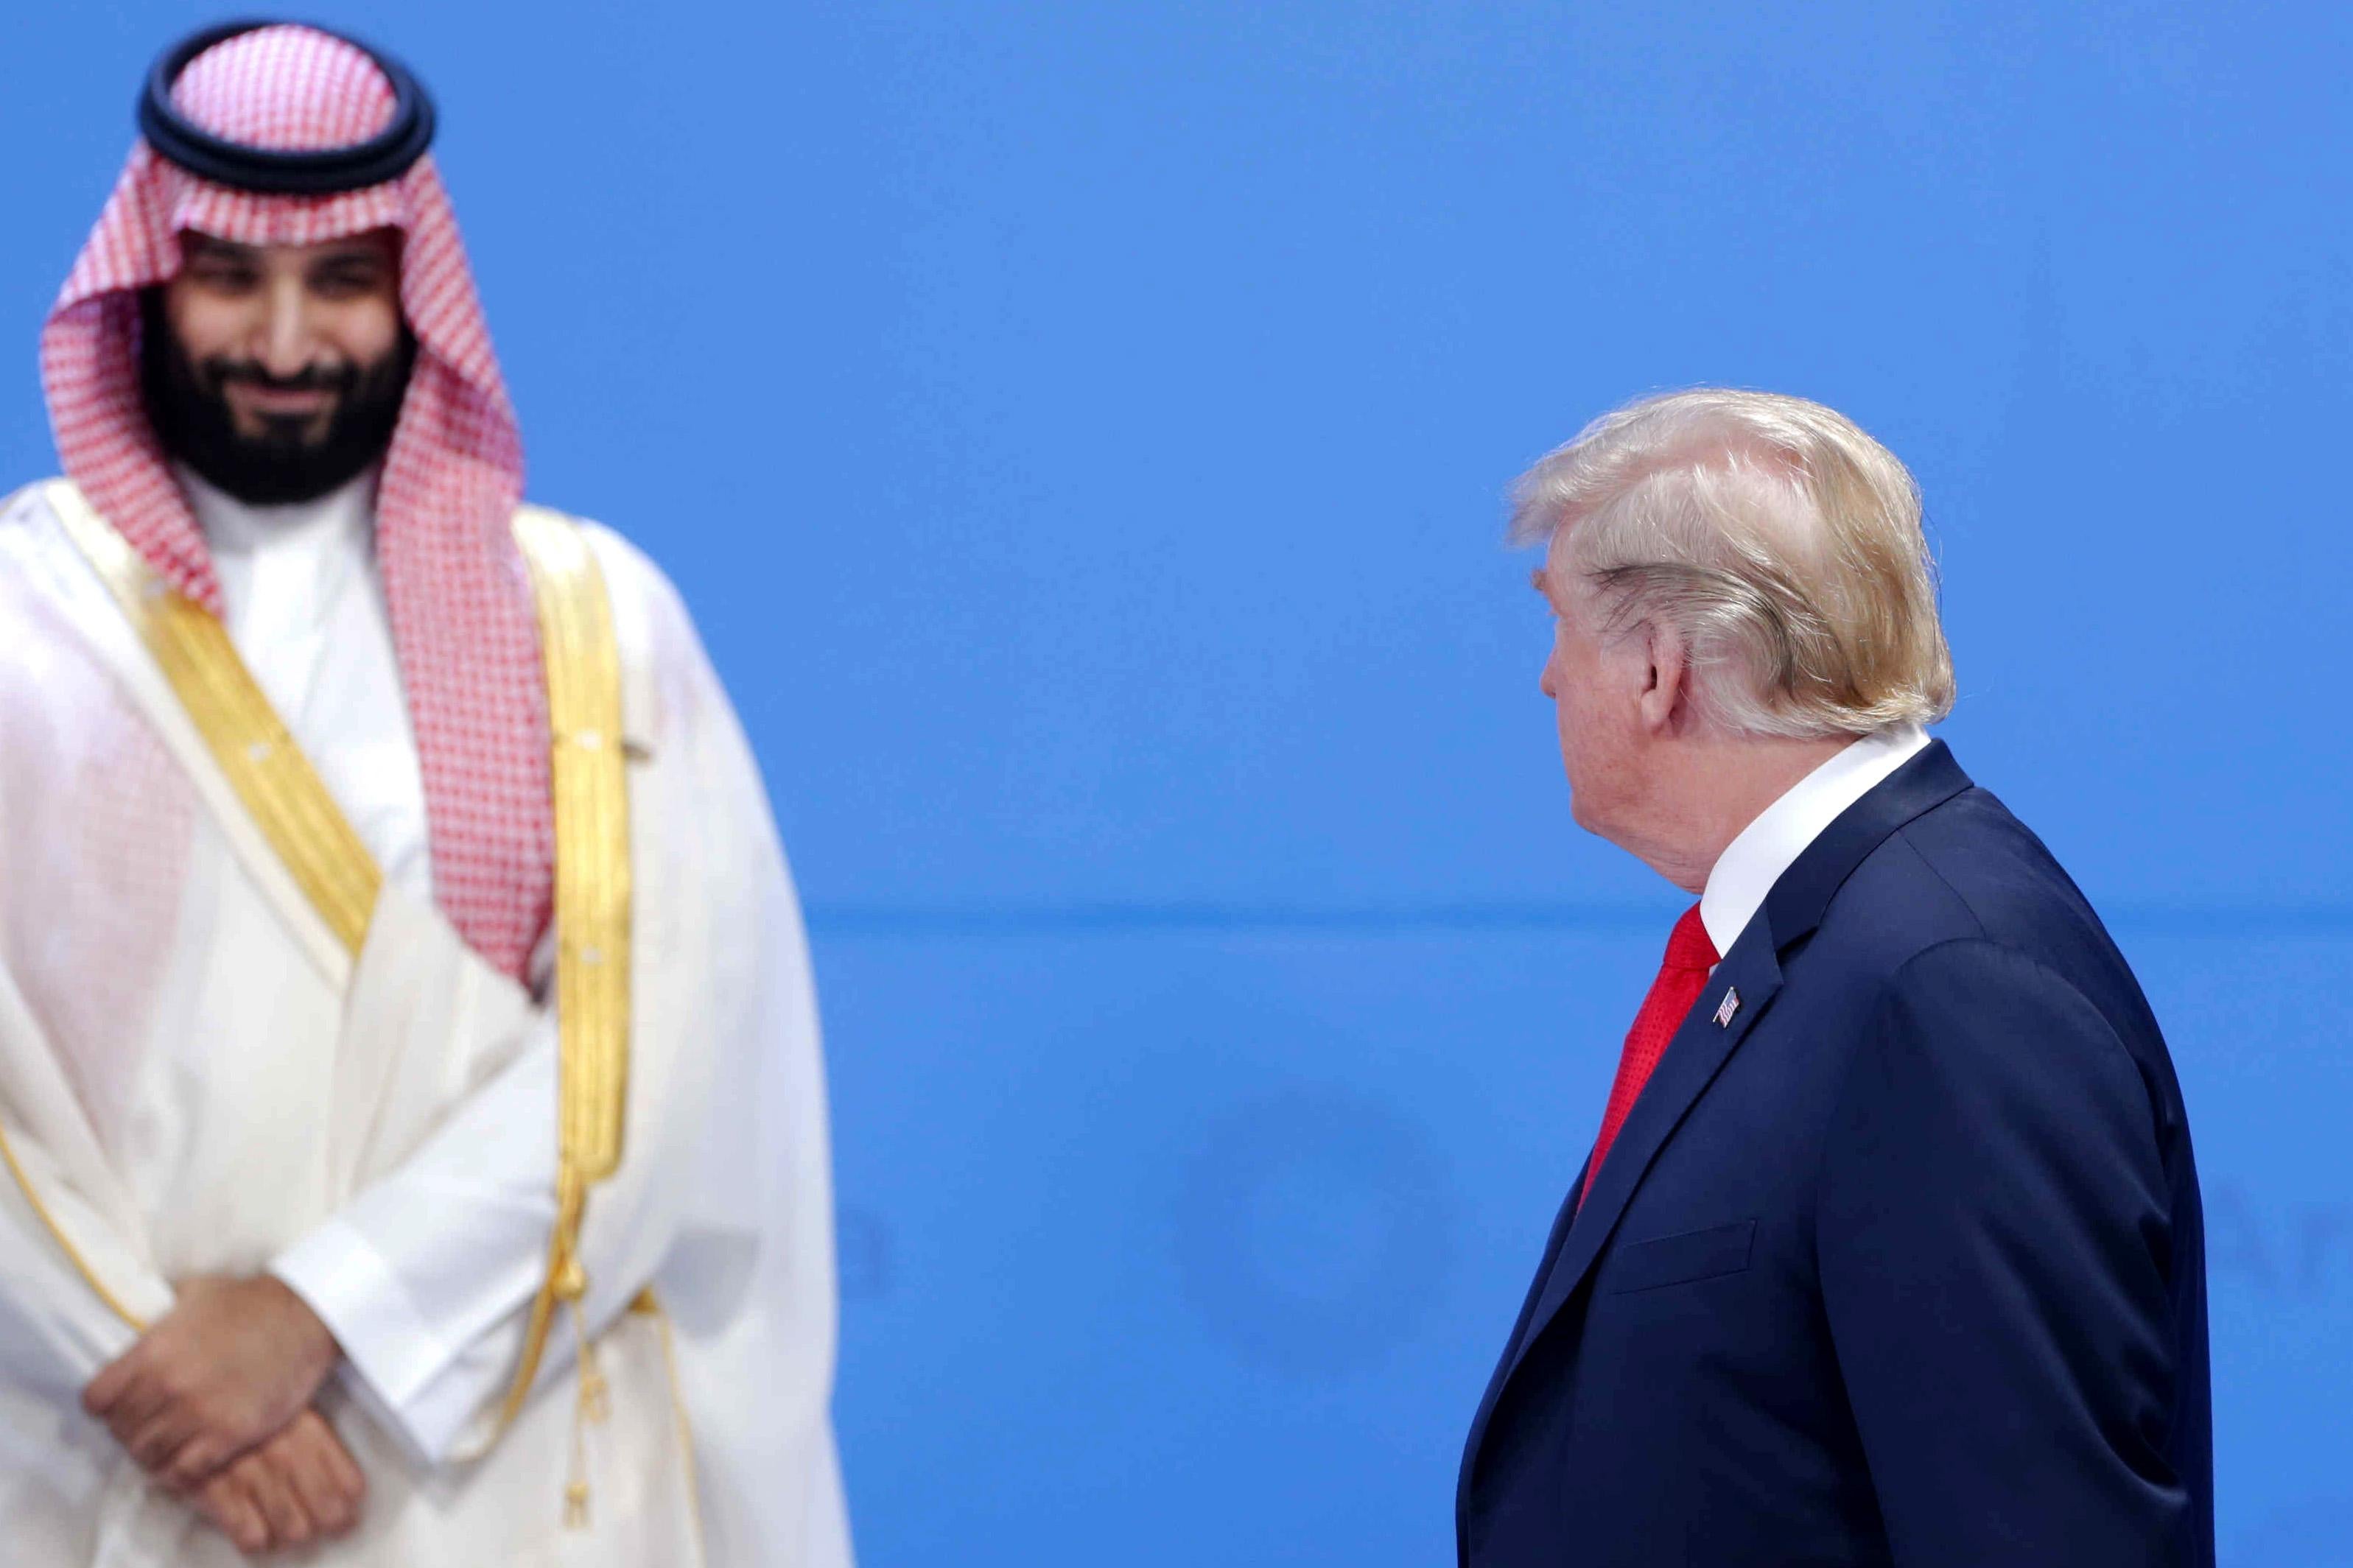 President Trump looks over at Crown Prince of Saudi Arabia Mohammad bin Salman on the opening day of Argentina G20 Leaders' Summit 2018 at Costa Salguero on Nov. 30, 2018 in Buenos Aires, Argentina. 